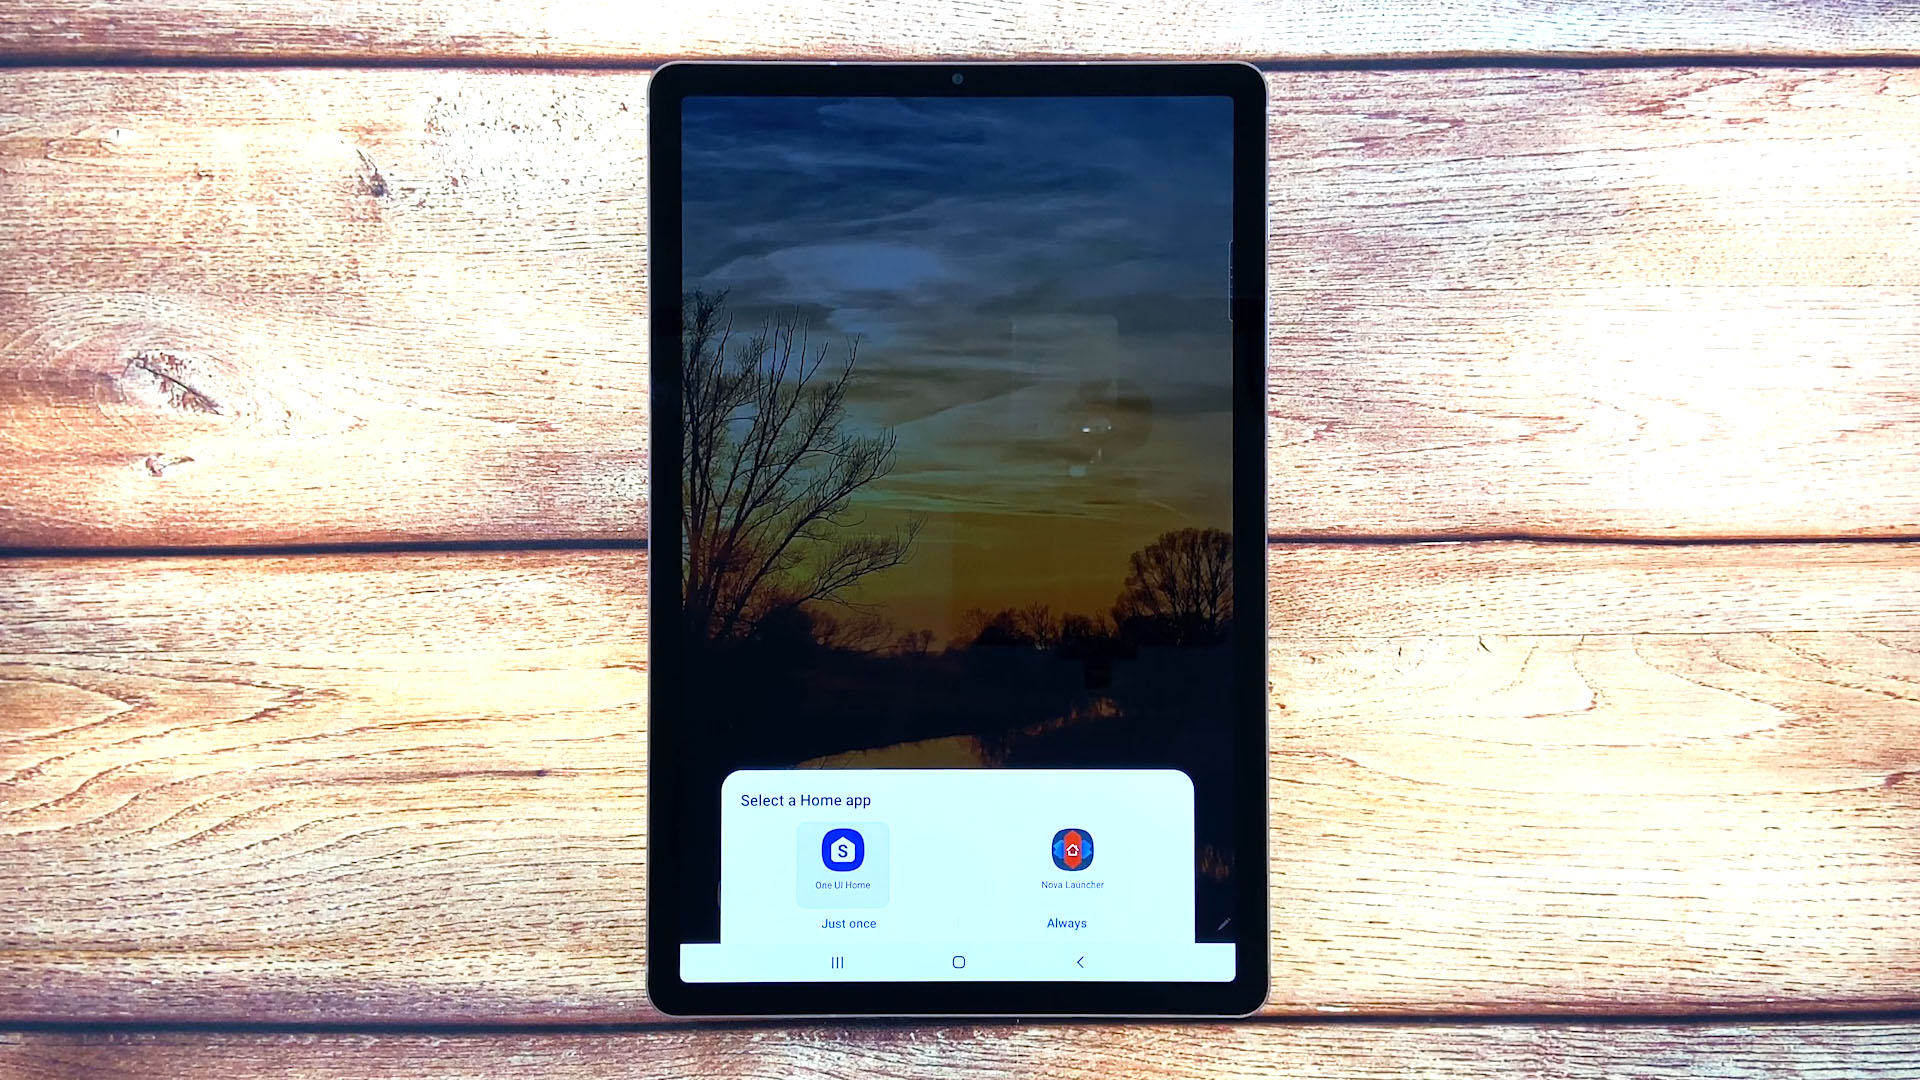 rename app icon tab s6 home screen-picklaunch